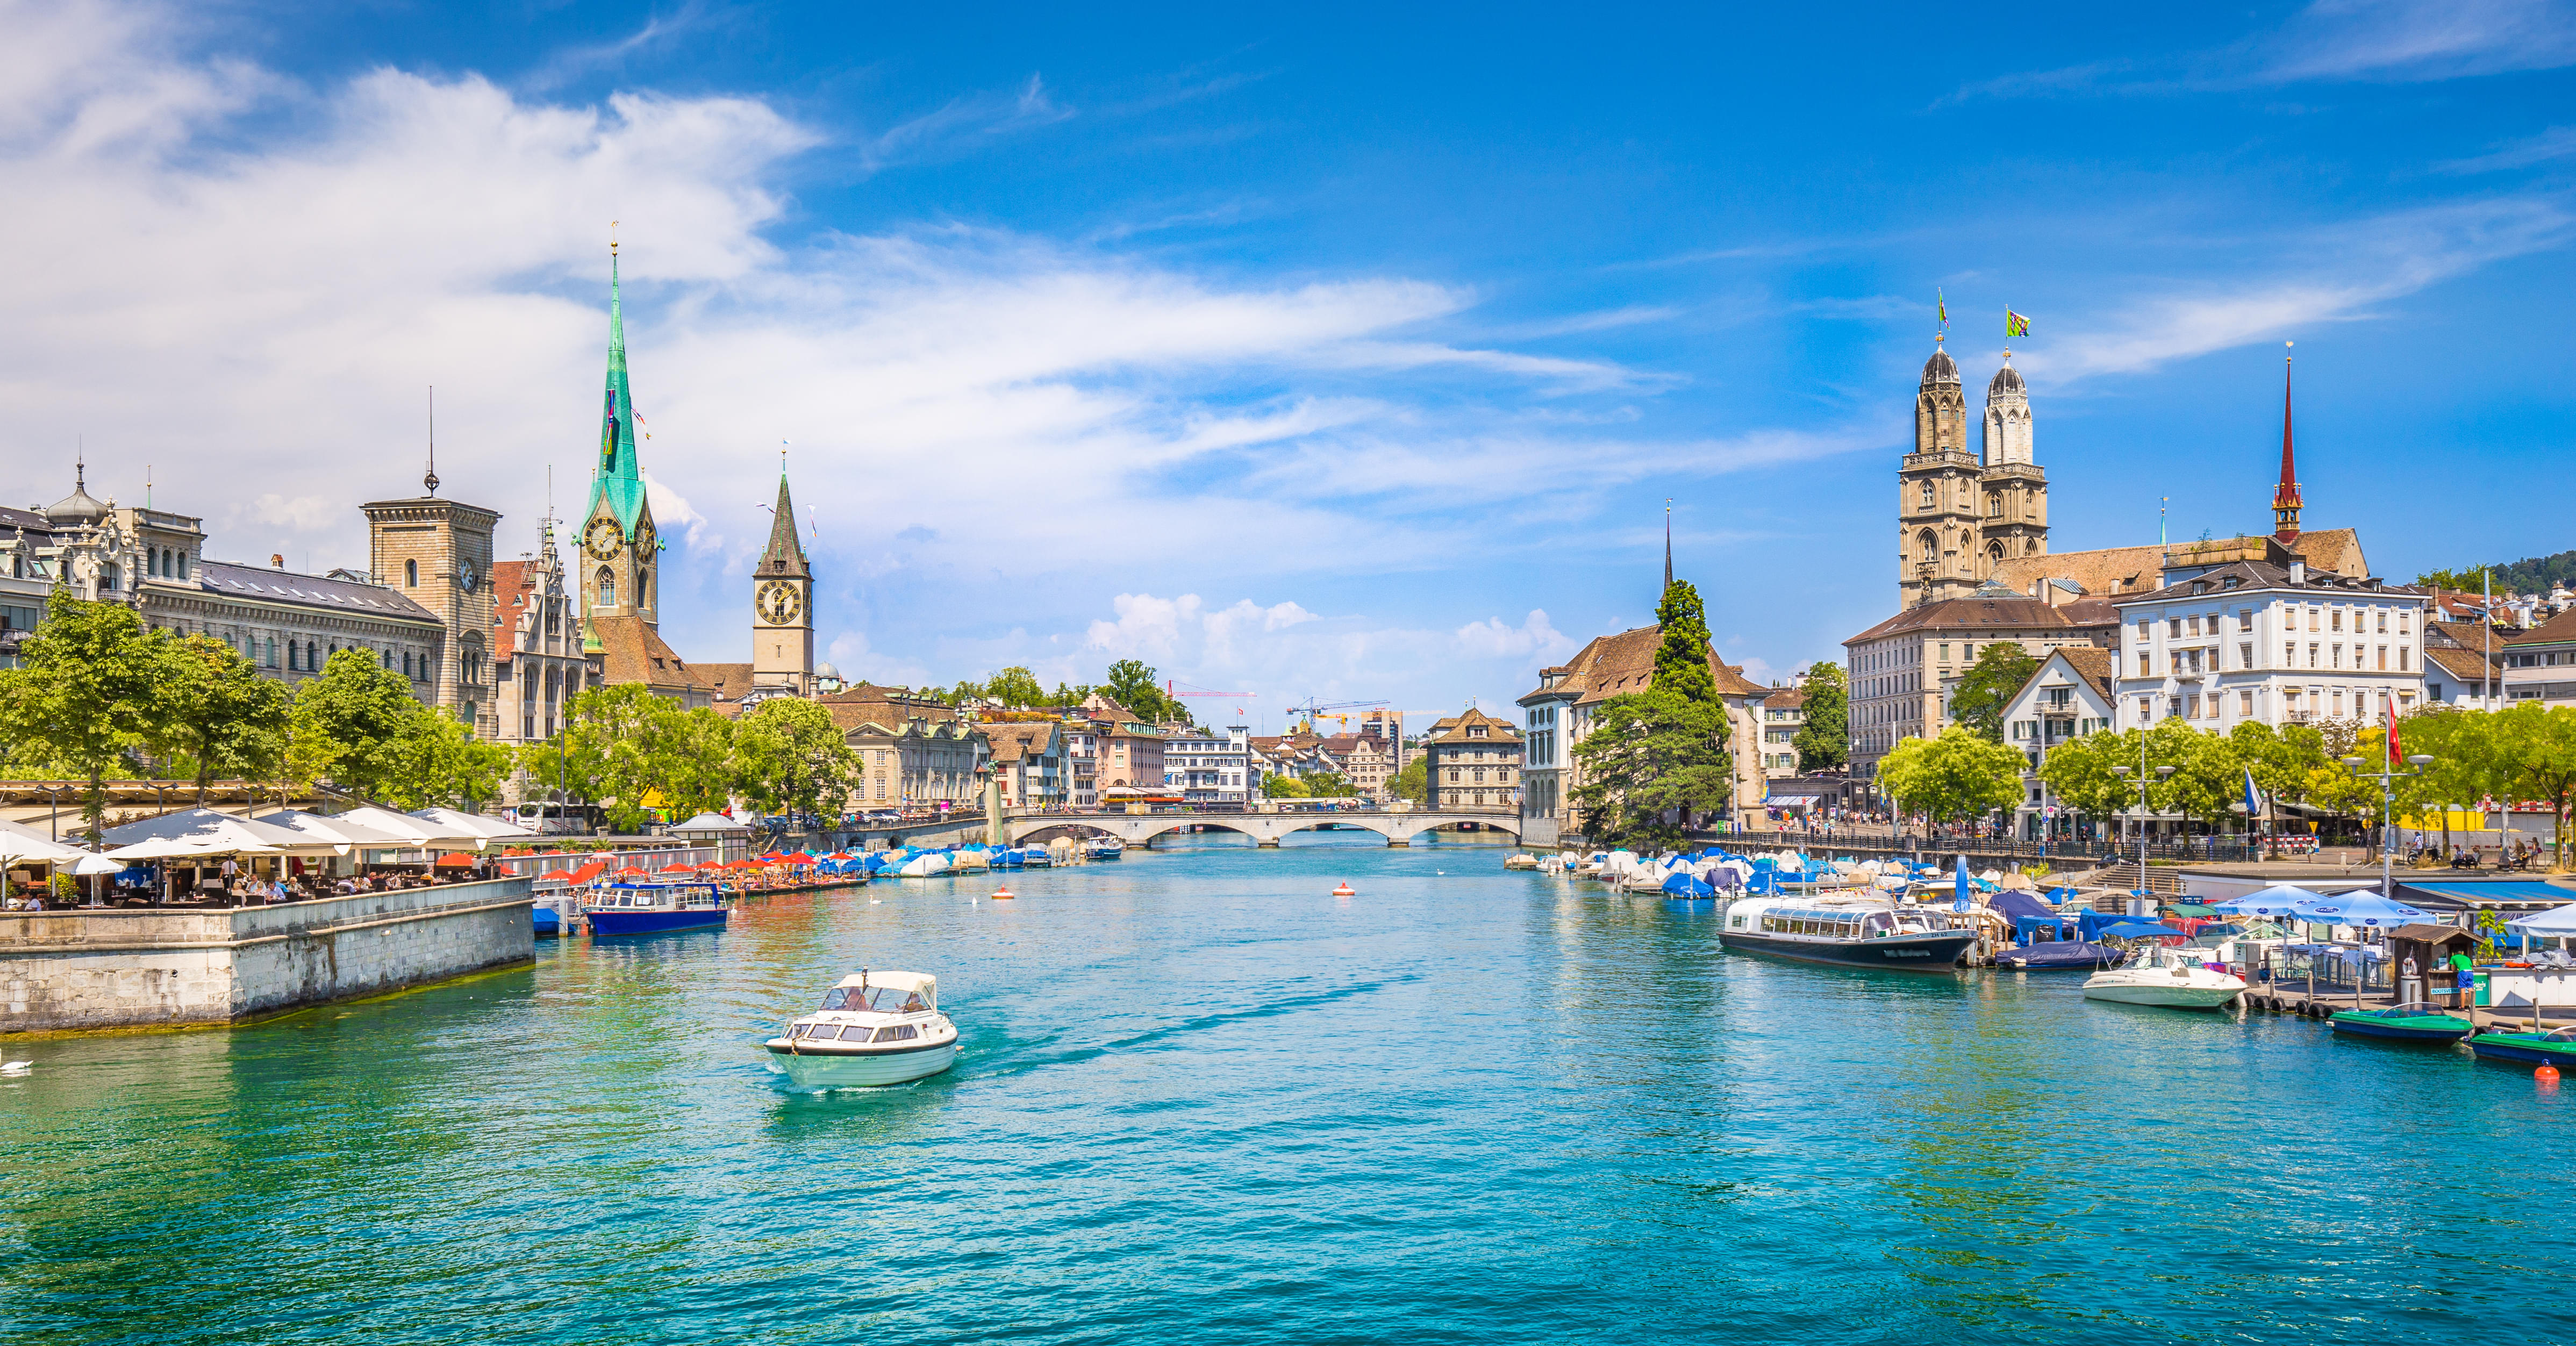 Best Places To Stay in Zurich